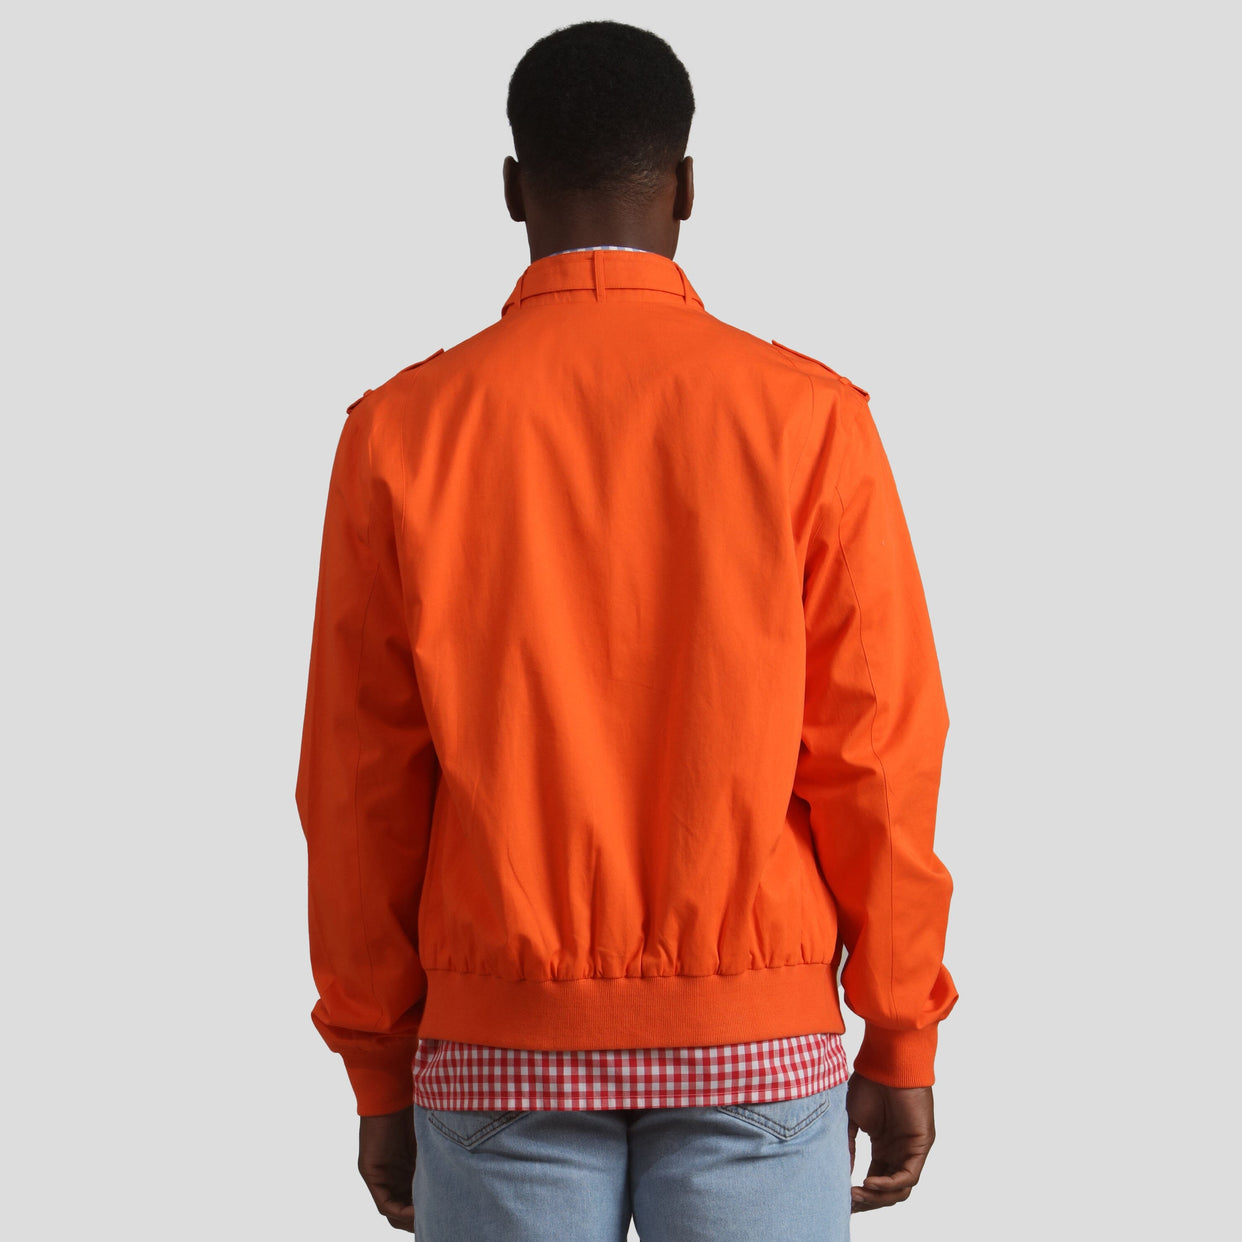 10 Members Only ideas  members only jacket, racer jacket, jackets